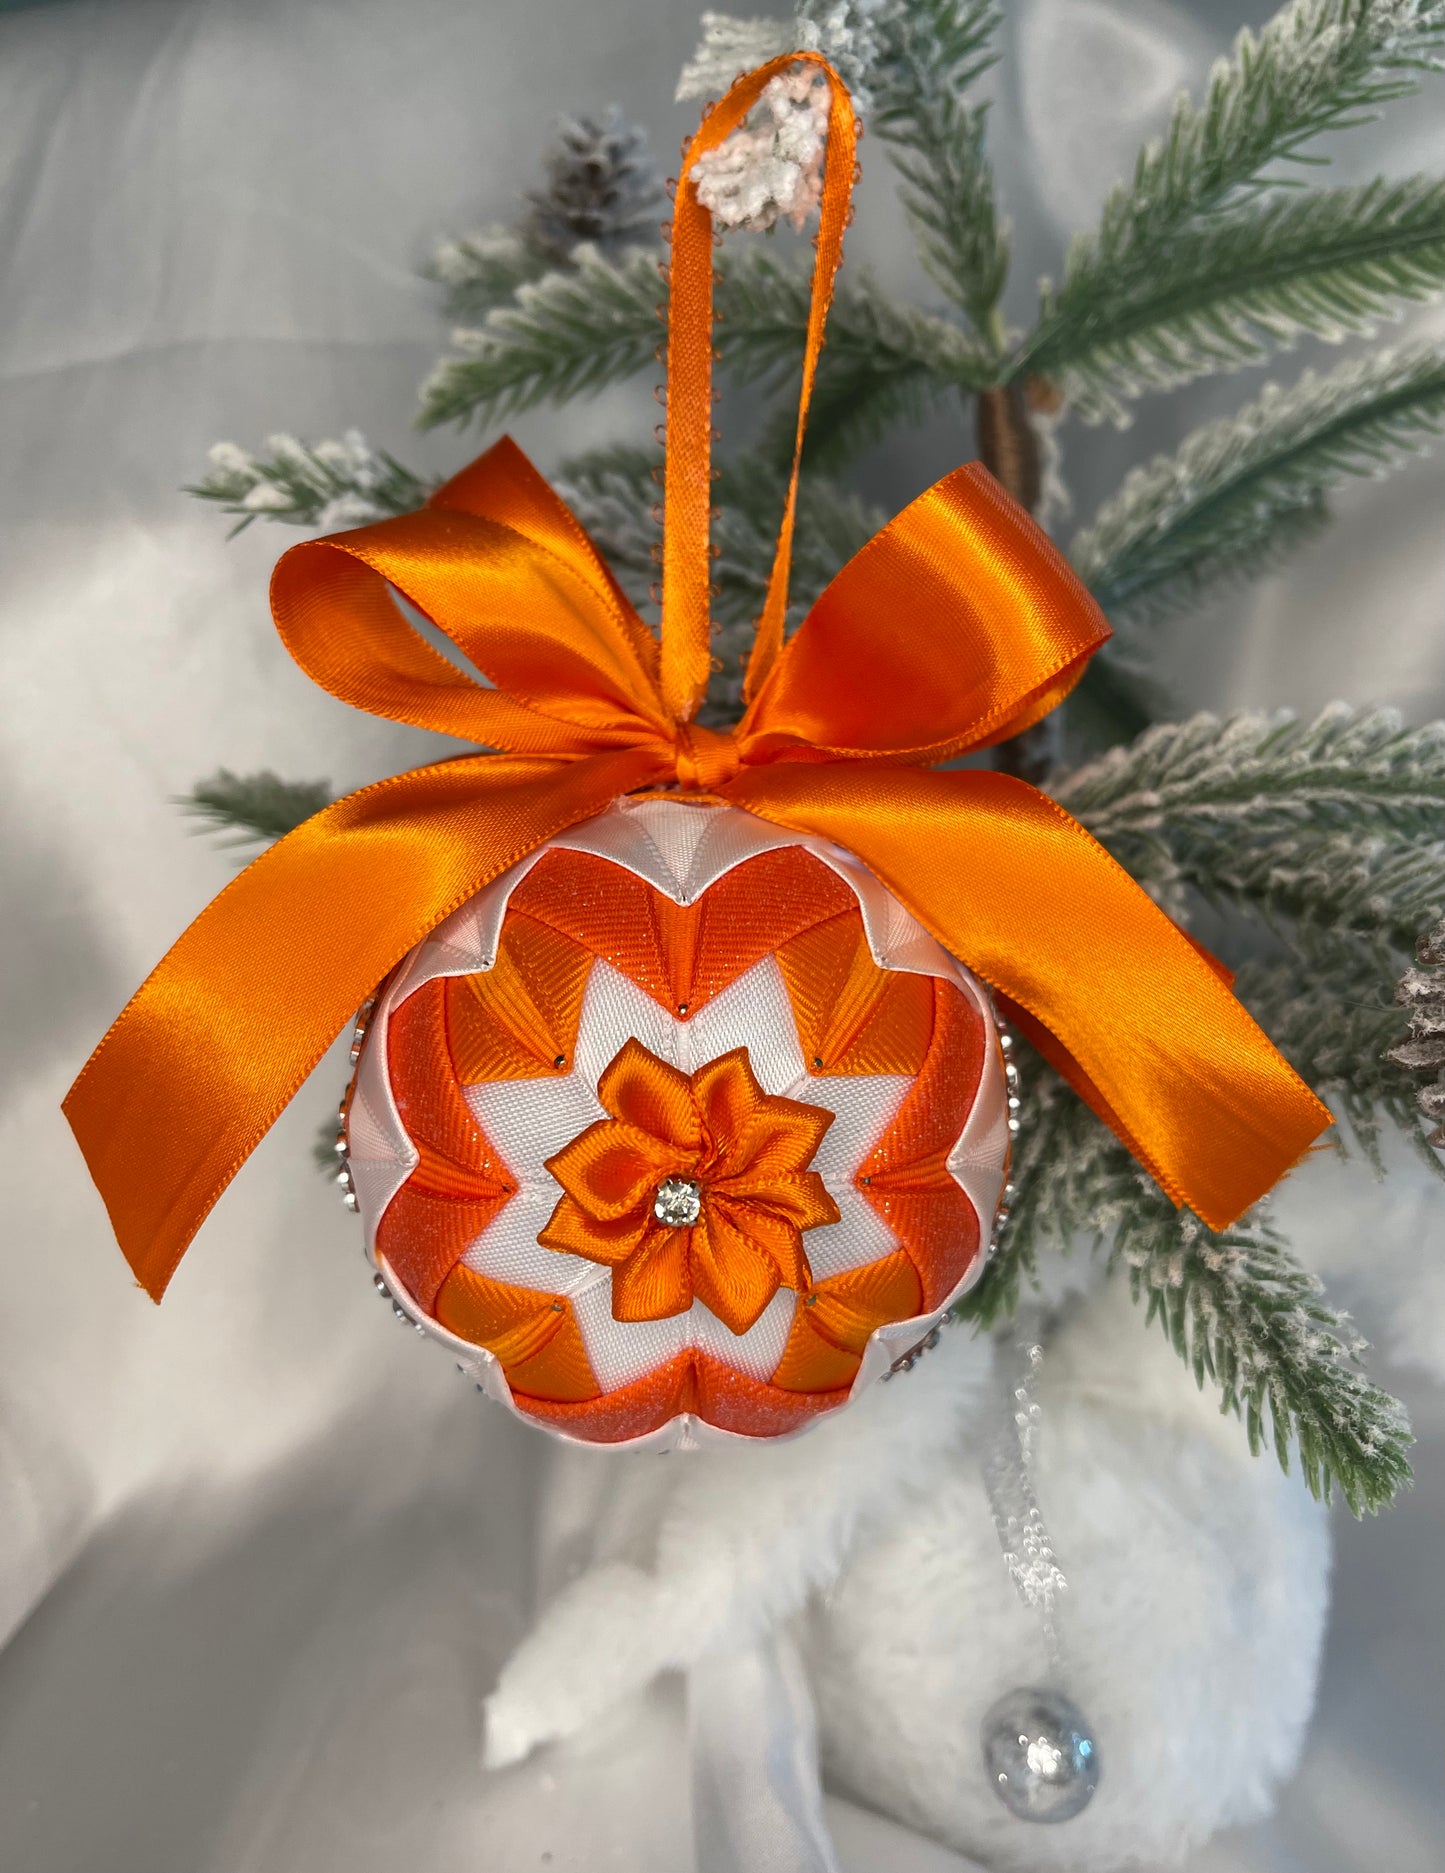 Handcrafted ornaments for any occasions